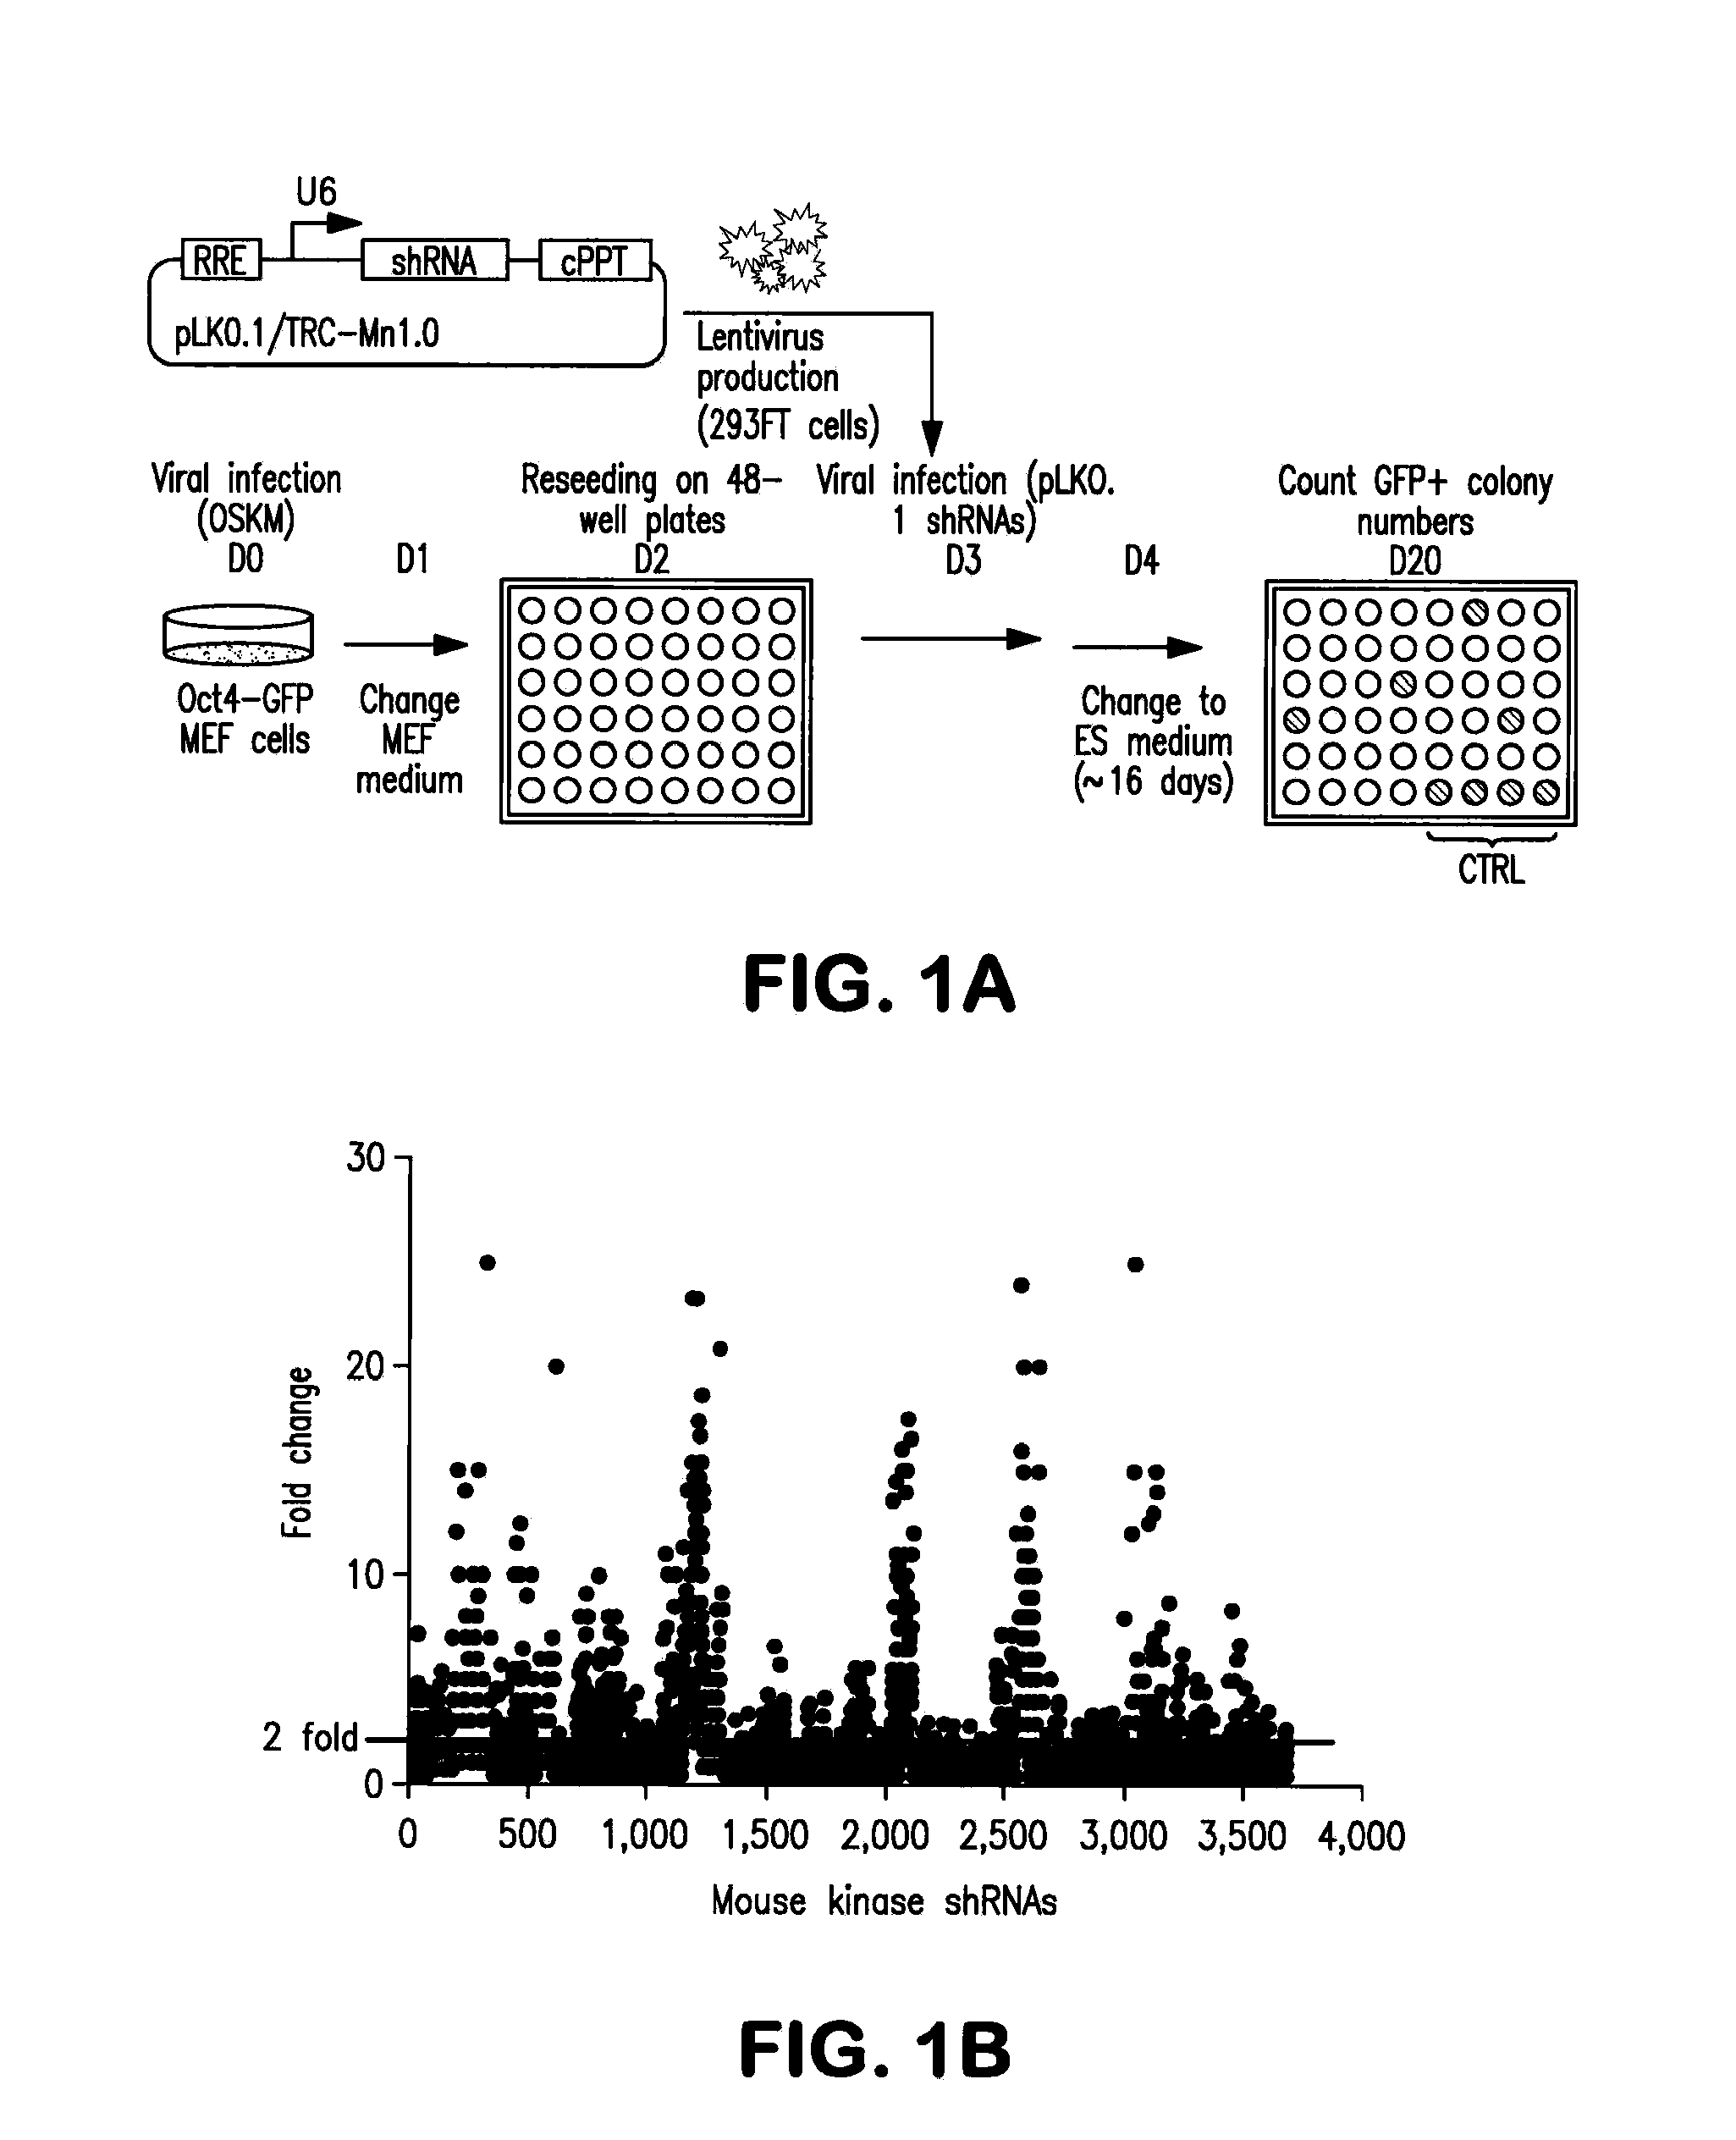 Methods for promoting cell reprogramming